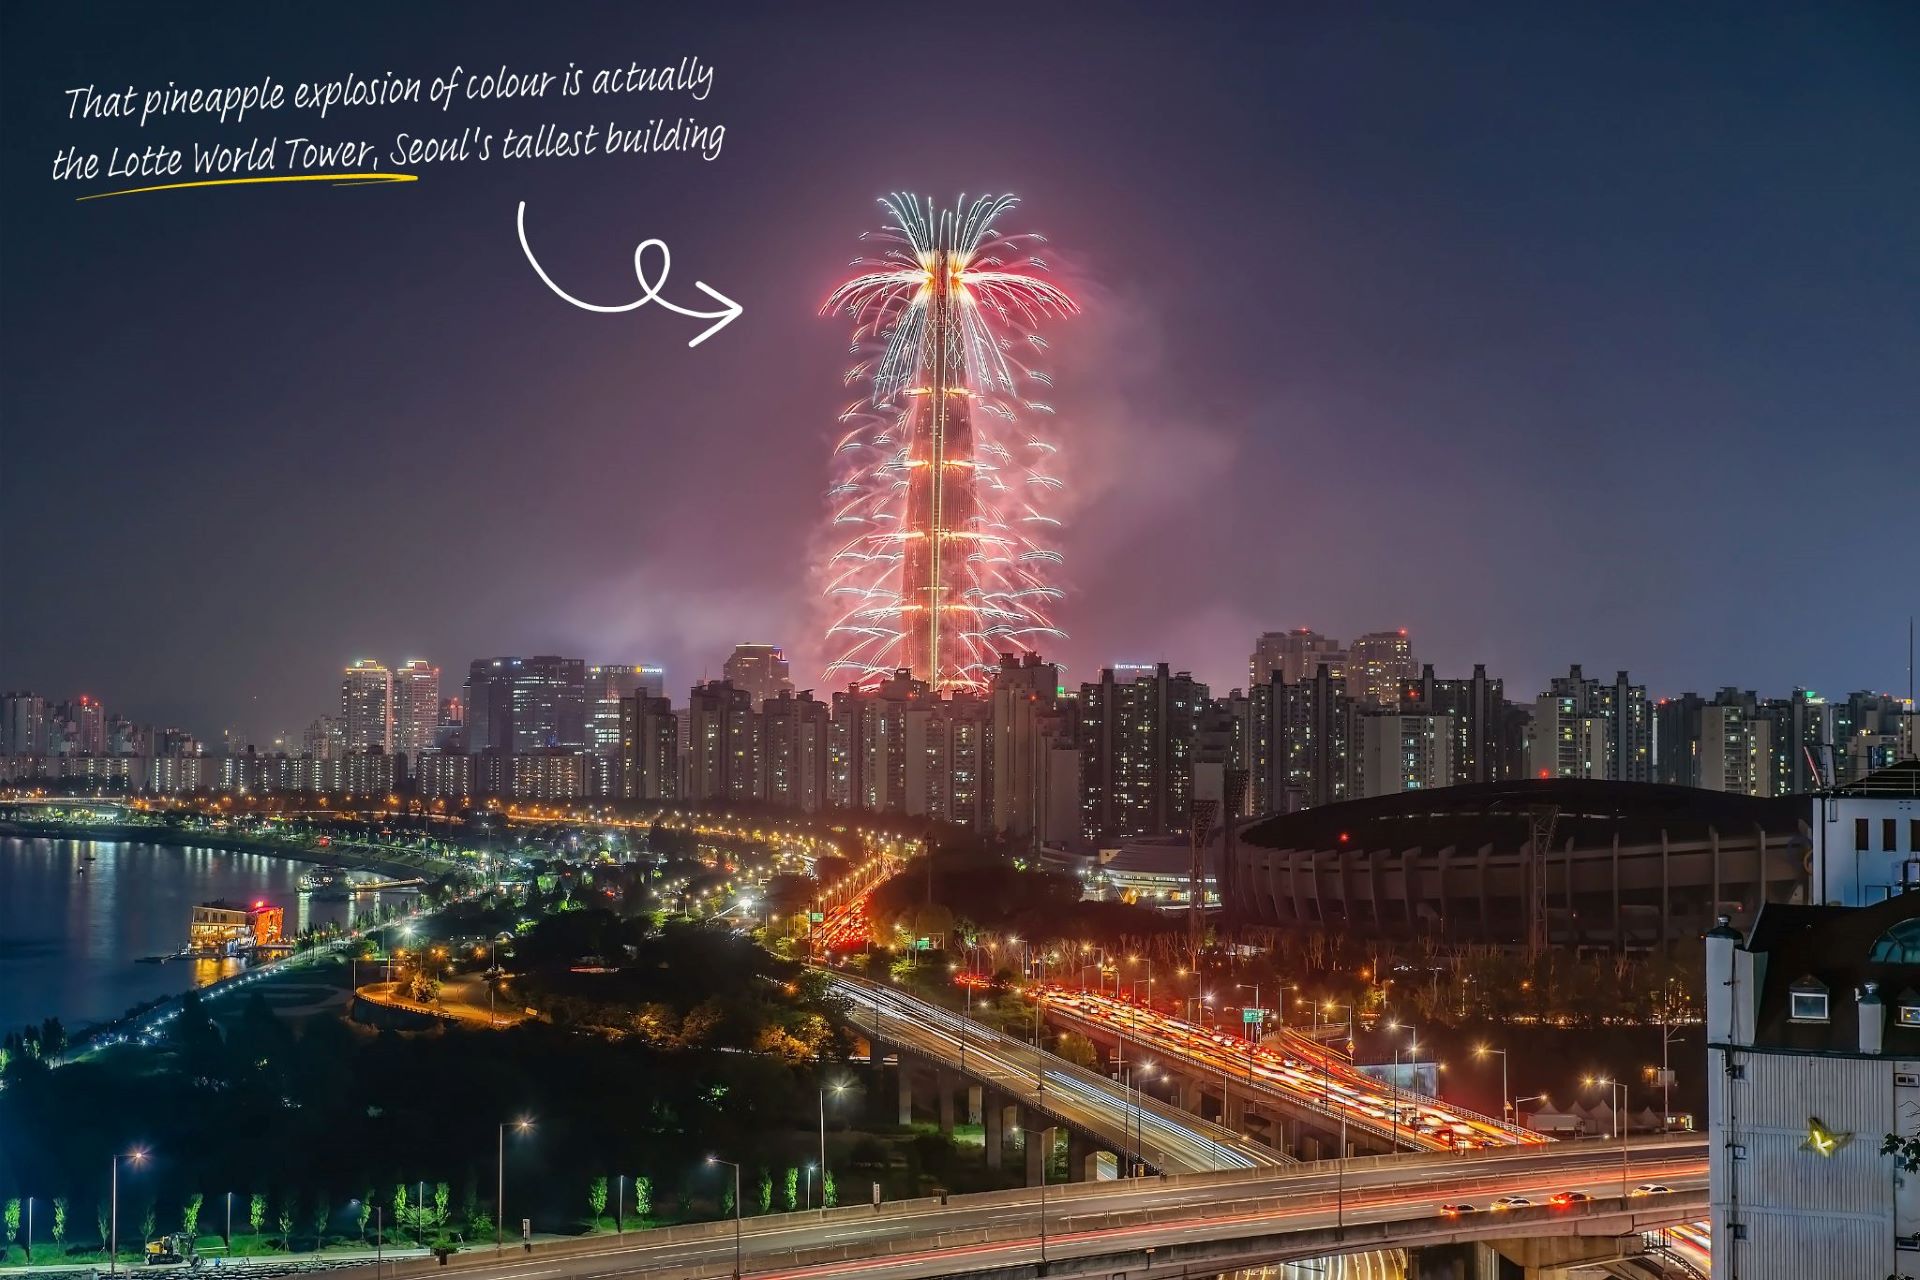 Lotte World Tower in Seoul is lit up at night by fireworks.